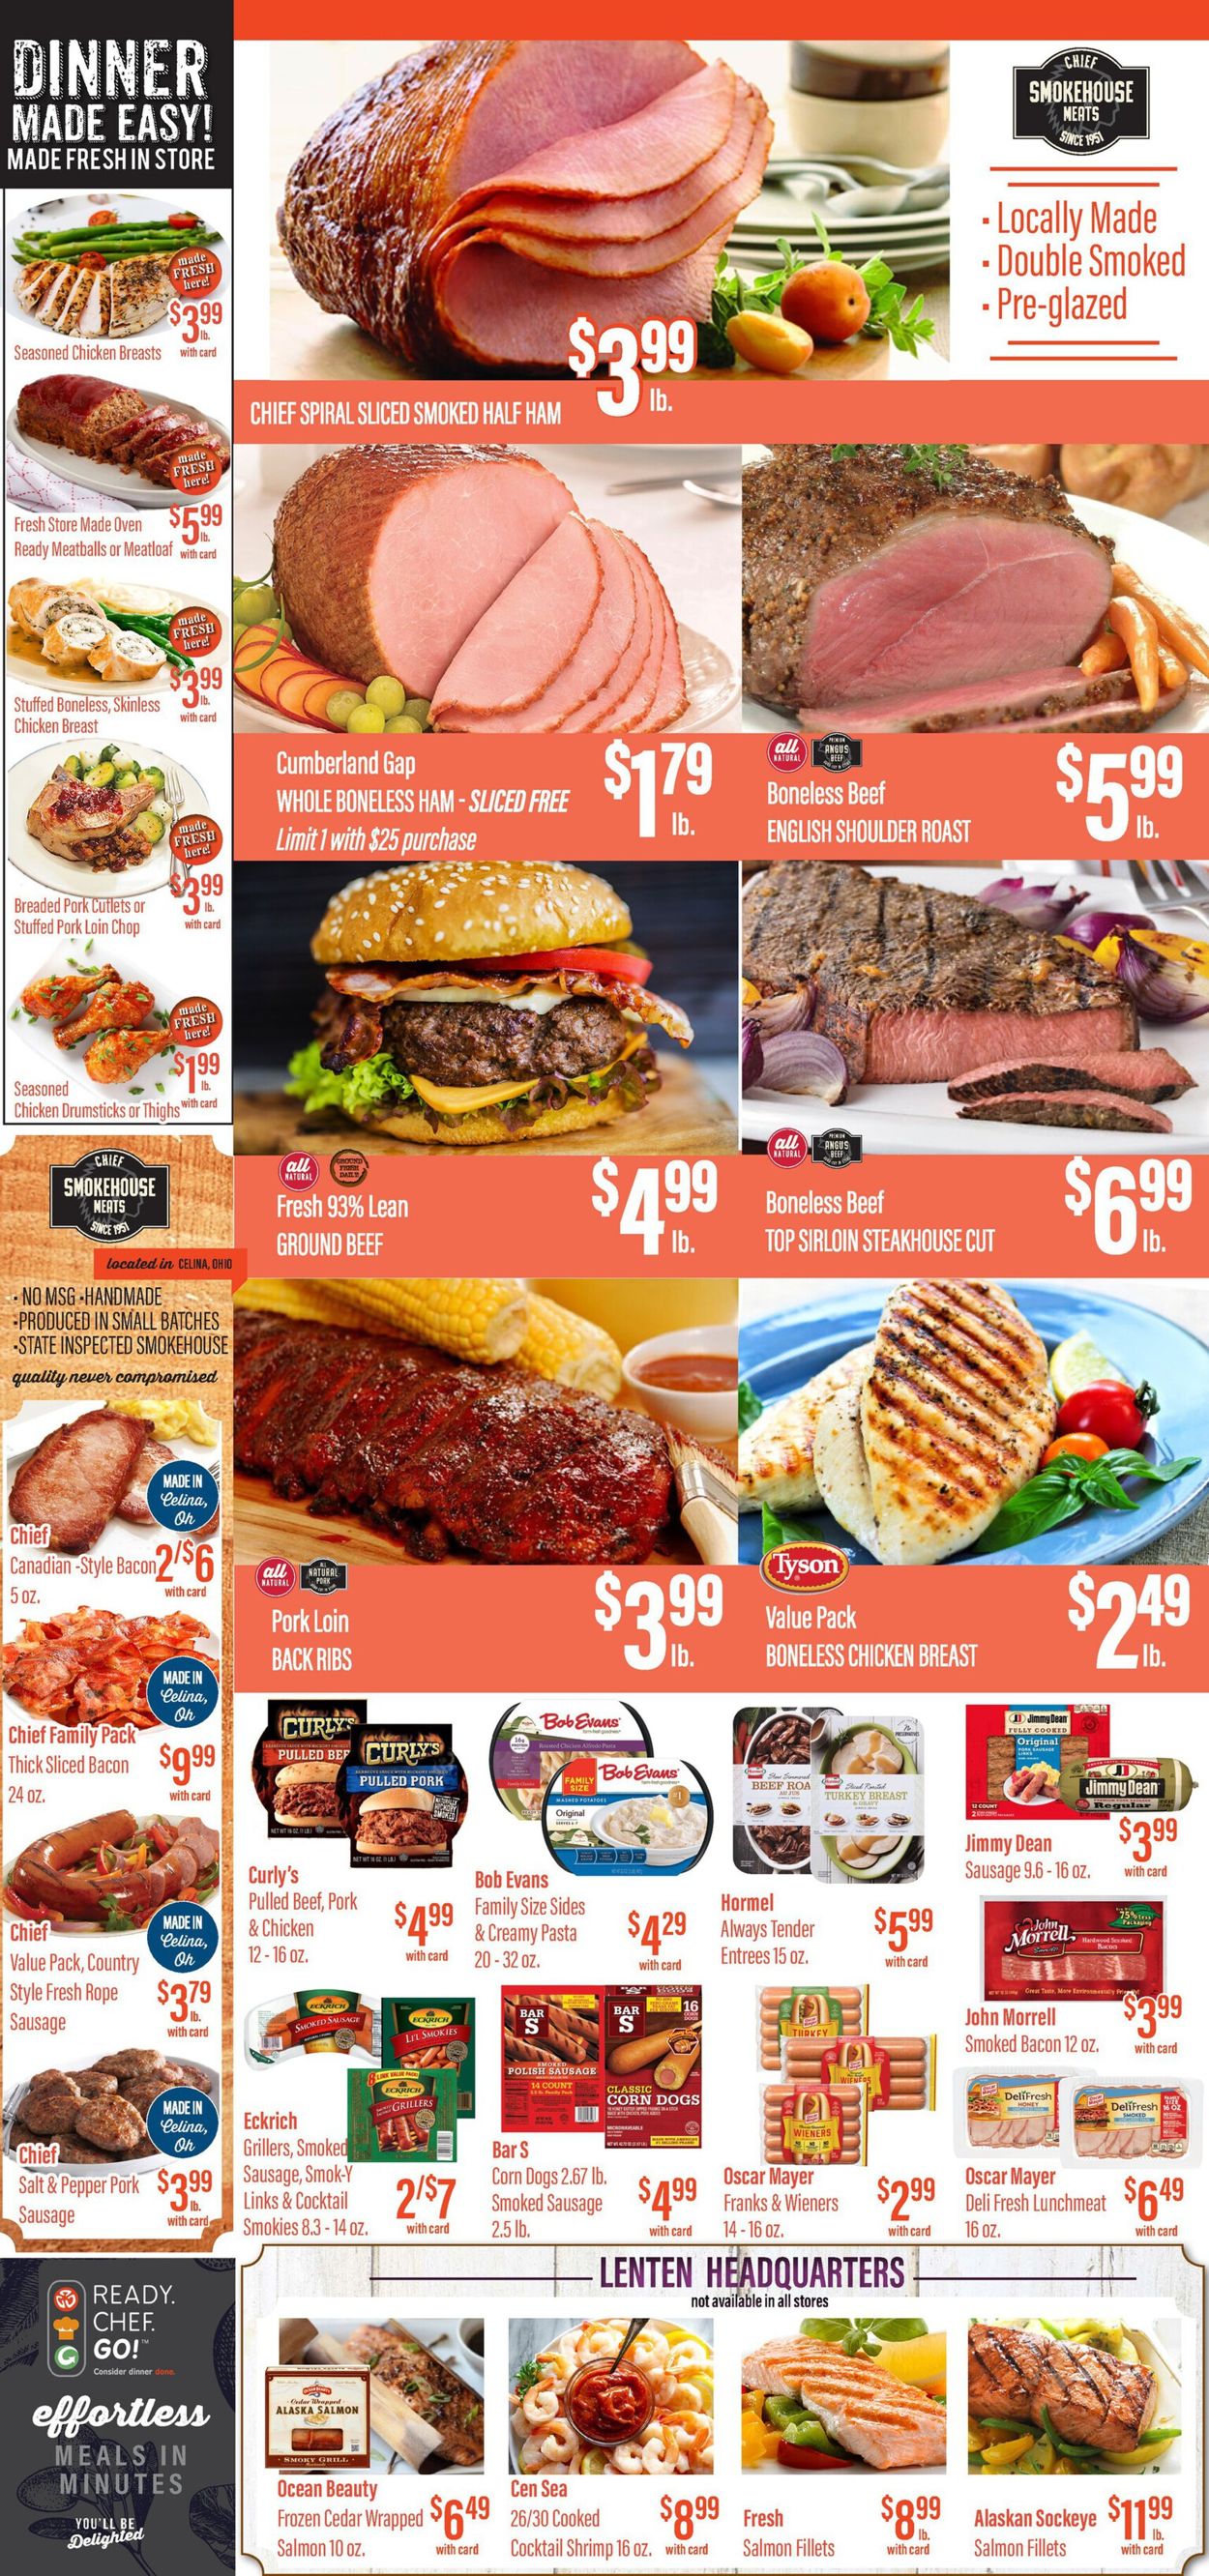 Remke Markets - Easter 2021 Weekly Ad Circular - valid 03/25-03/31/2021 (Page 2)